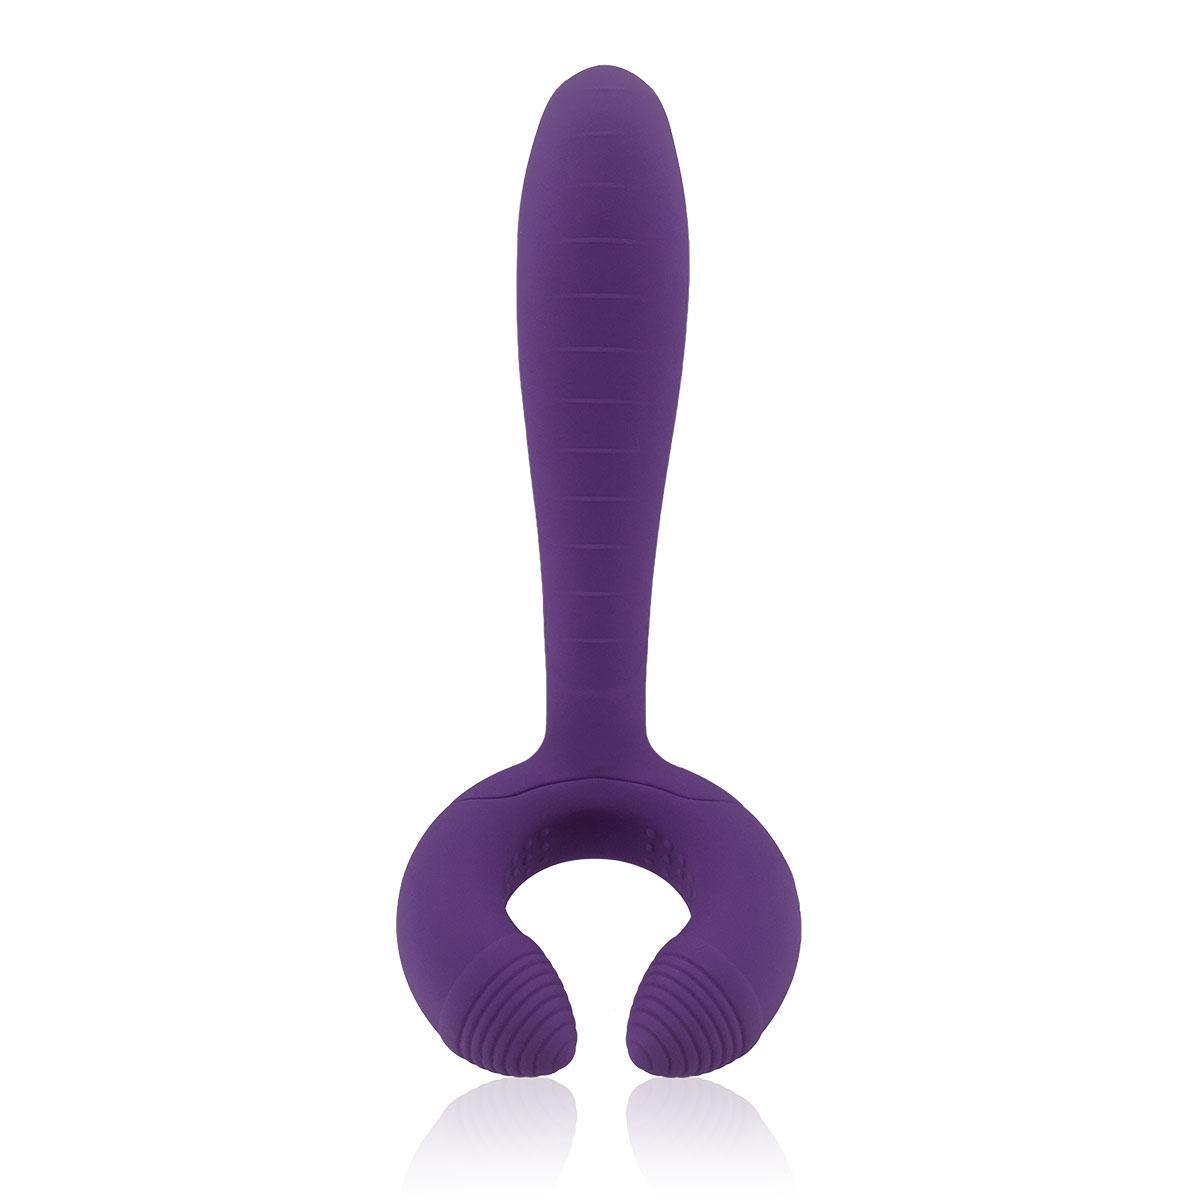 Rianne S Duo Vibe - Buy At Luxury Toy X - Free 3-Day Shipping